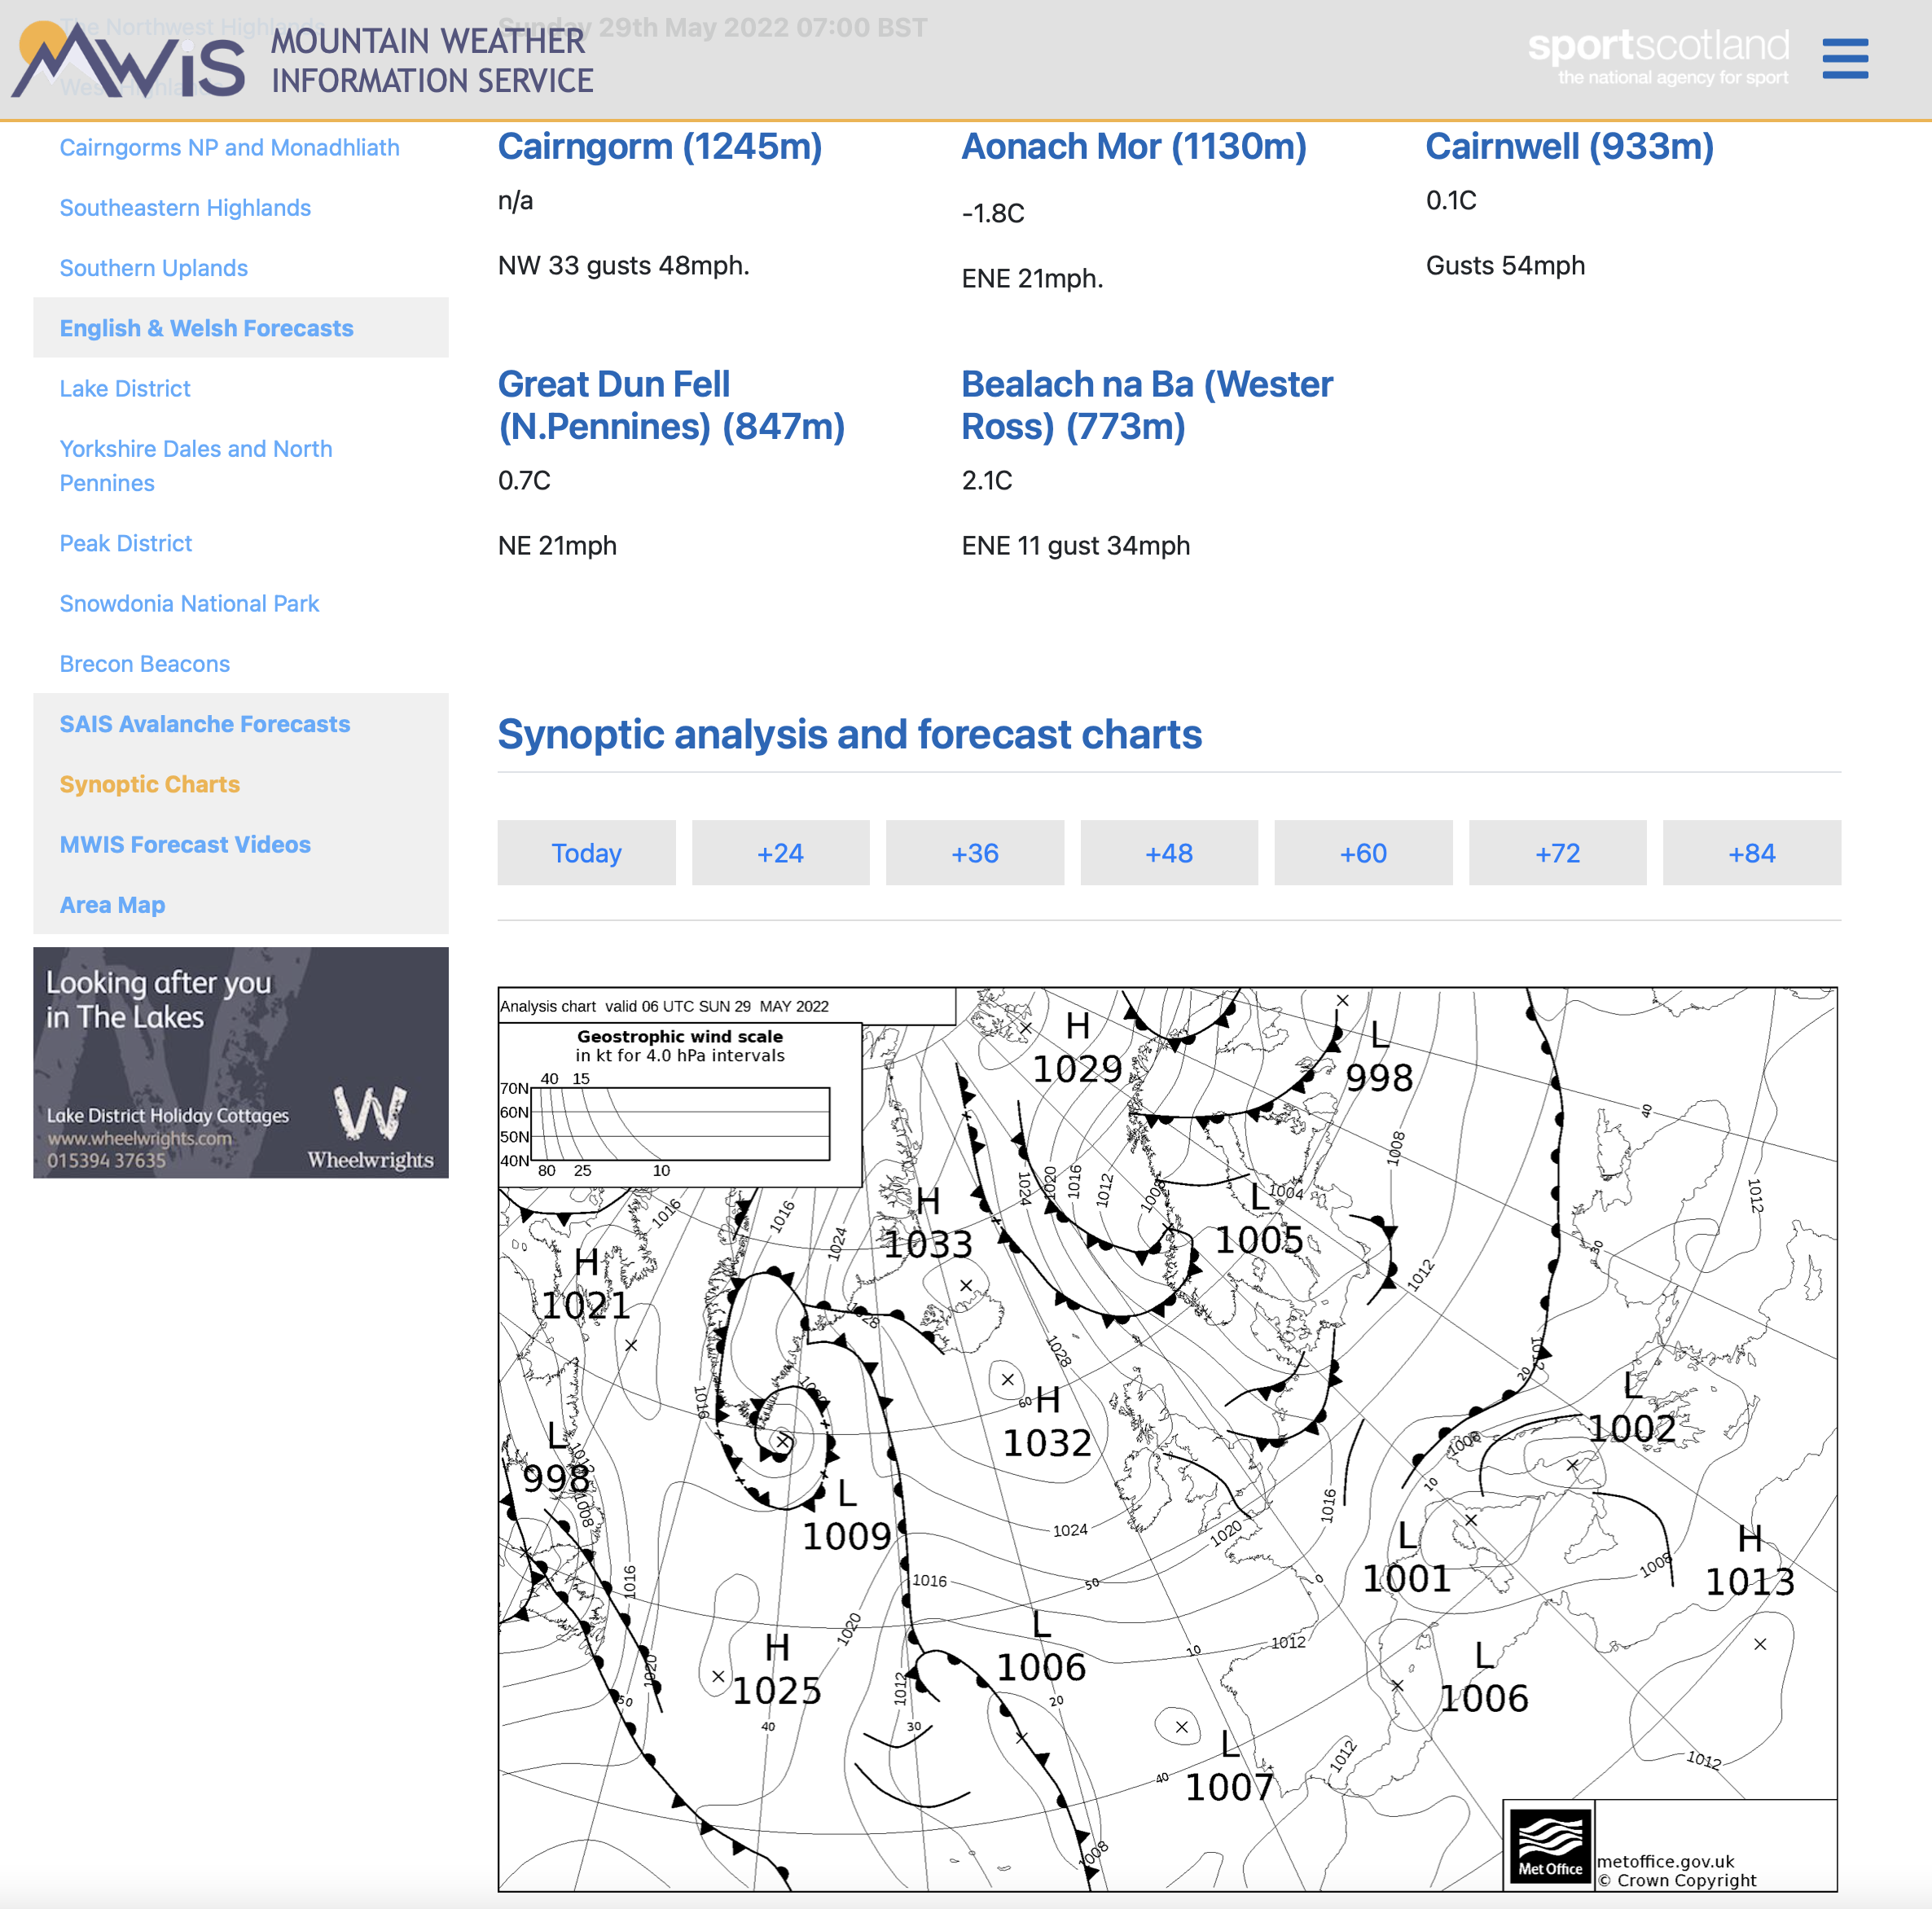 A screenshot of the MWIS website showing a typical synoptic chart of the UK